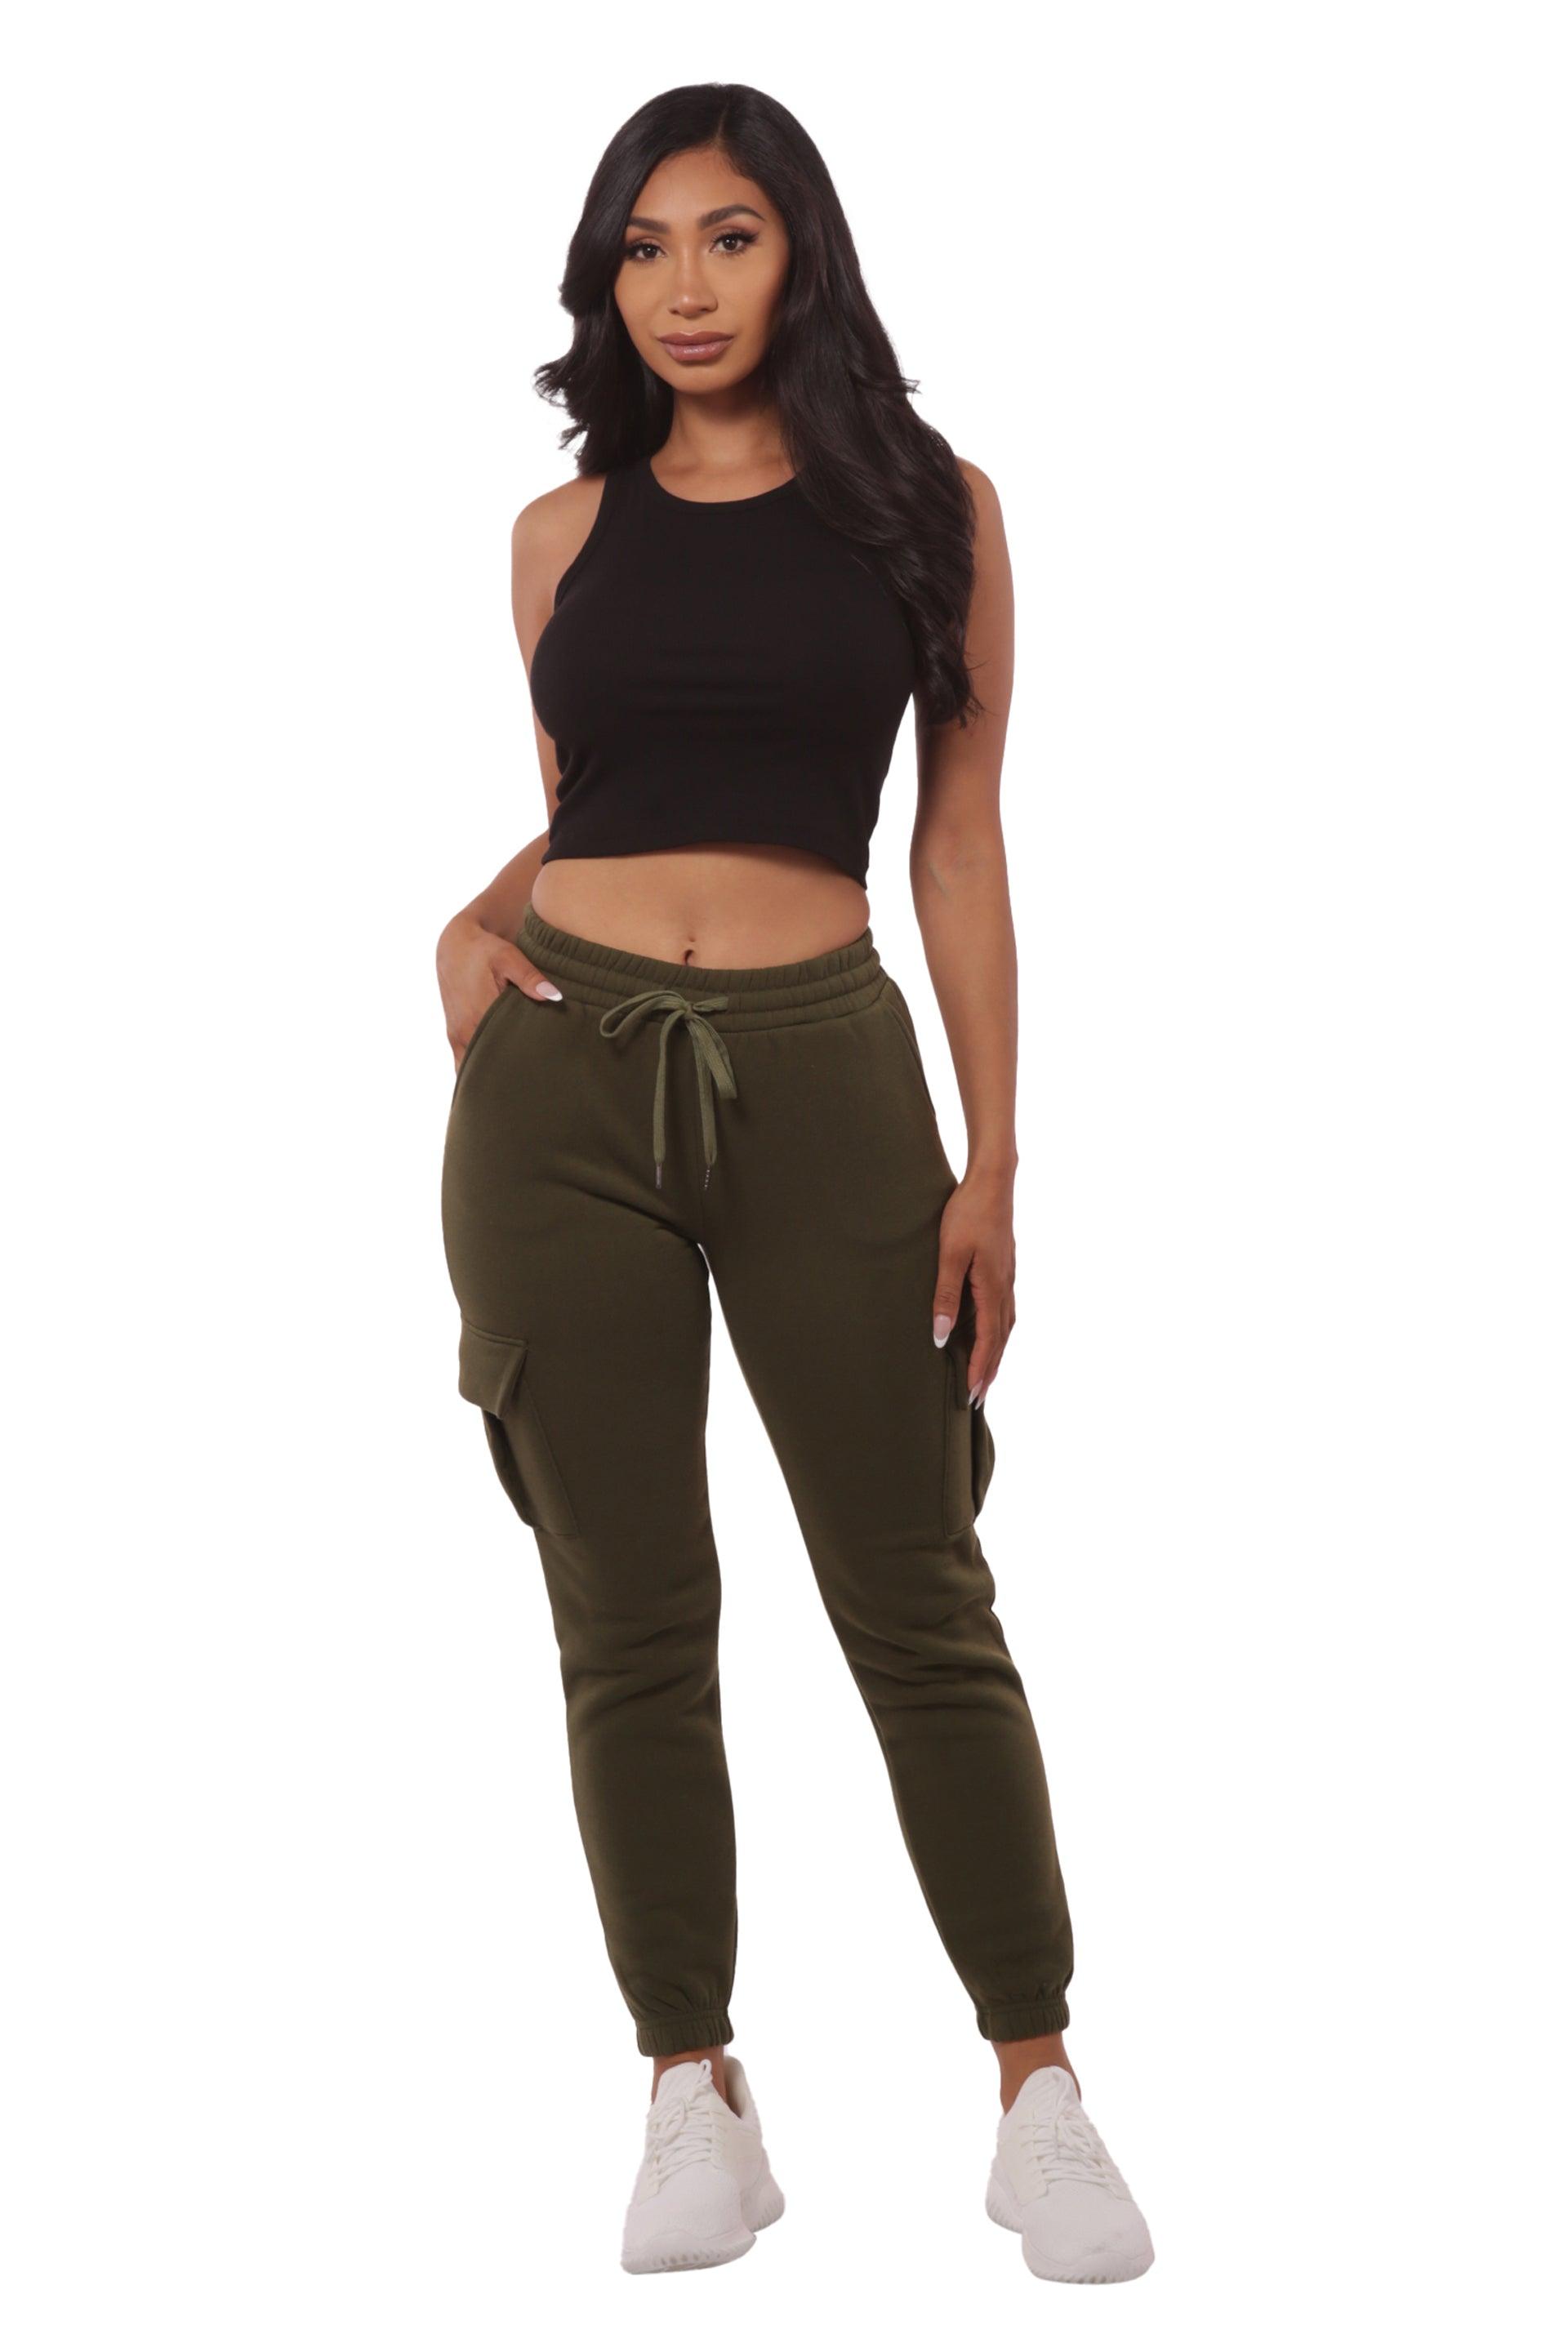  ShoSho Womens Straight Leg Cargo Pants Fleece Lined Joggers  with Bungee Cord Ties Black Small : Clothing, Shoes & Jewelry